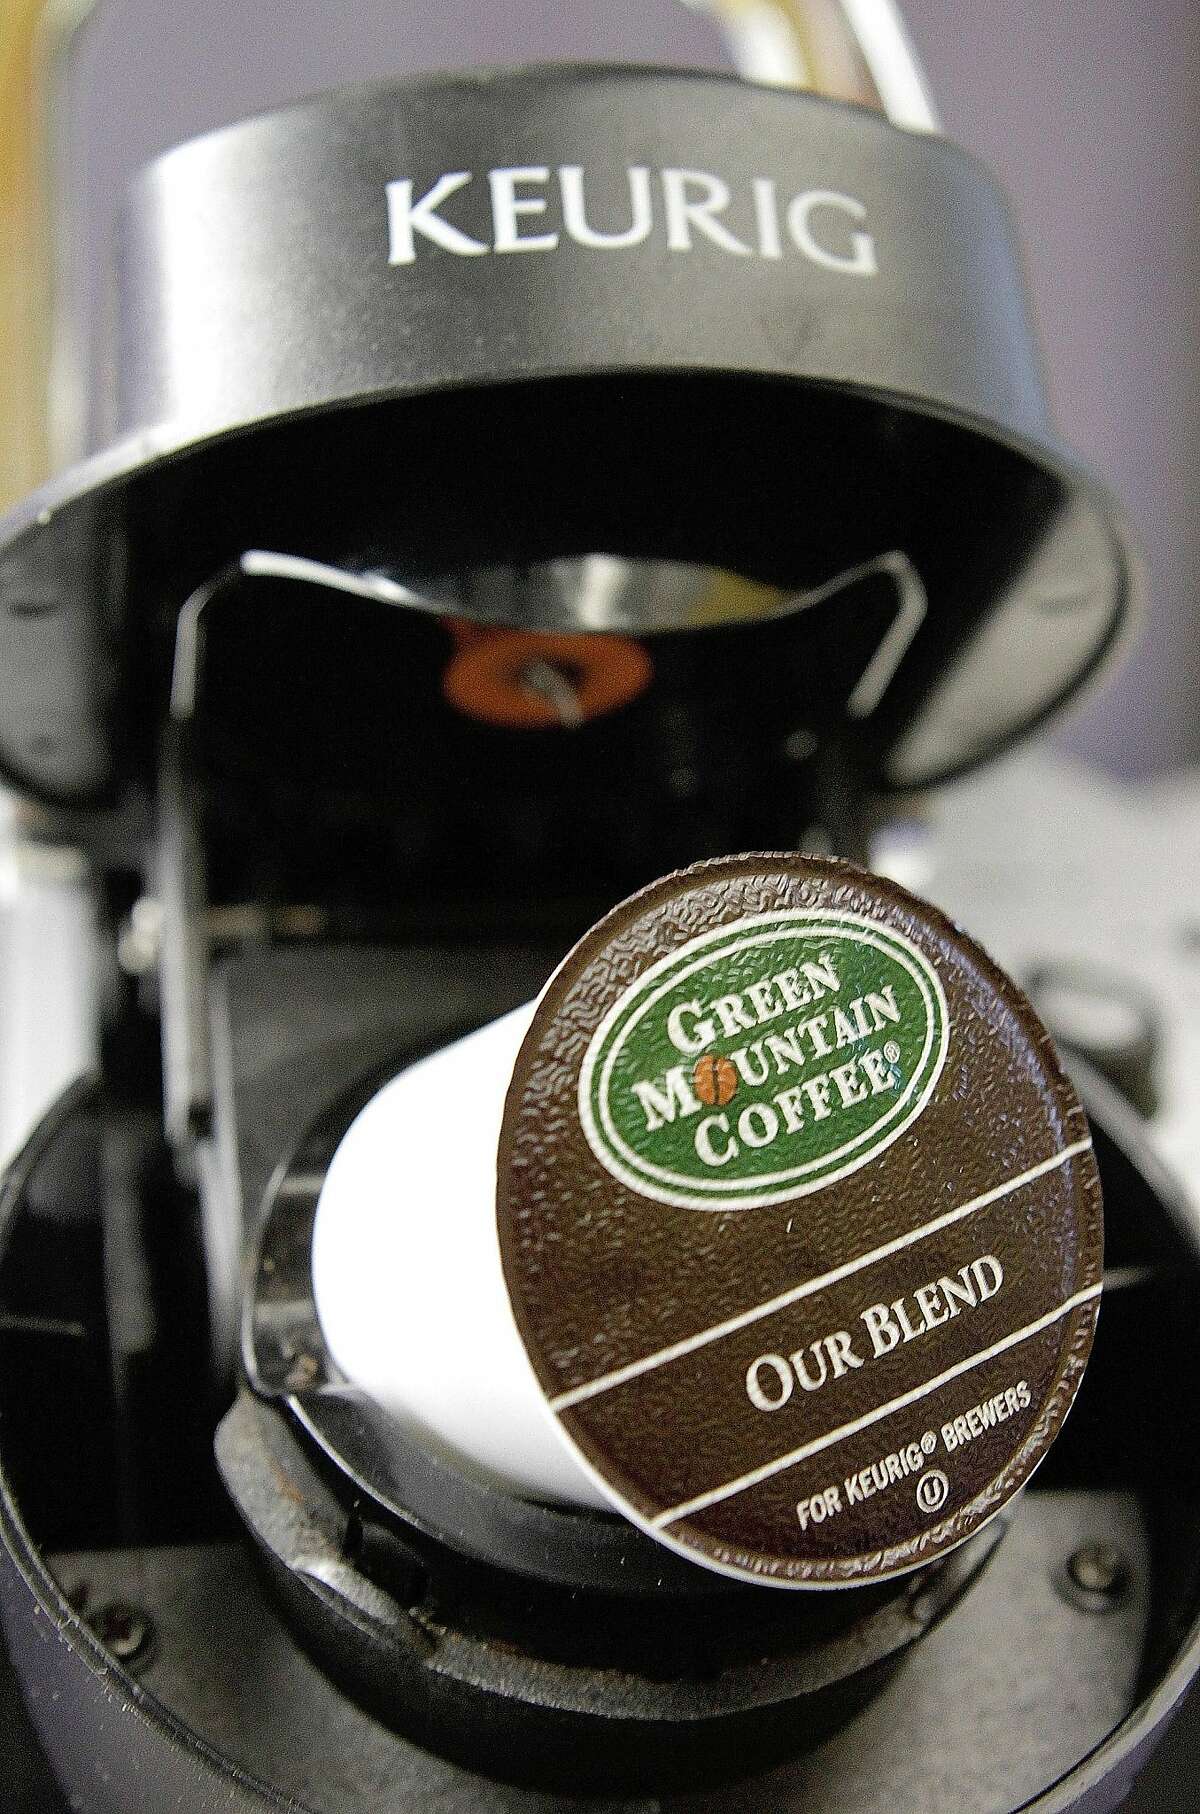 FILE - In this Oct. 7, 2010, file photo, a Green Mountain Coffee single-serving brewing cup is seen in a Keurig machine in Montpelier, Vt. Keurig, the single-cup coffee machine maker, said Monday, Dec. 7, 2015, that it has agreed to be sold to private equity firm JAB Holding Co. for almost $14 billion. (AP Photo/Toby Talbot, File)